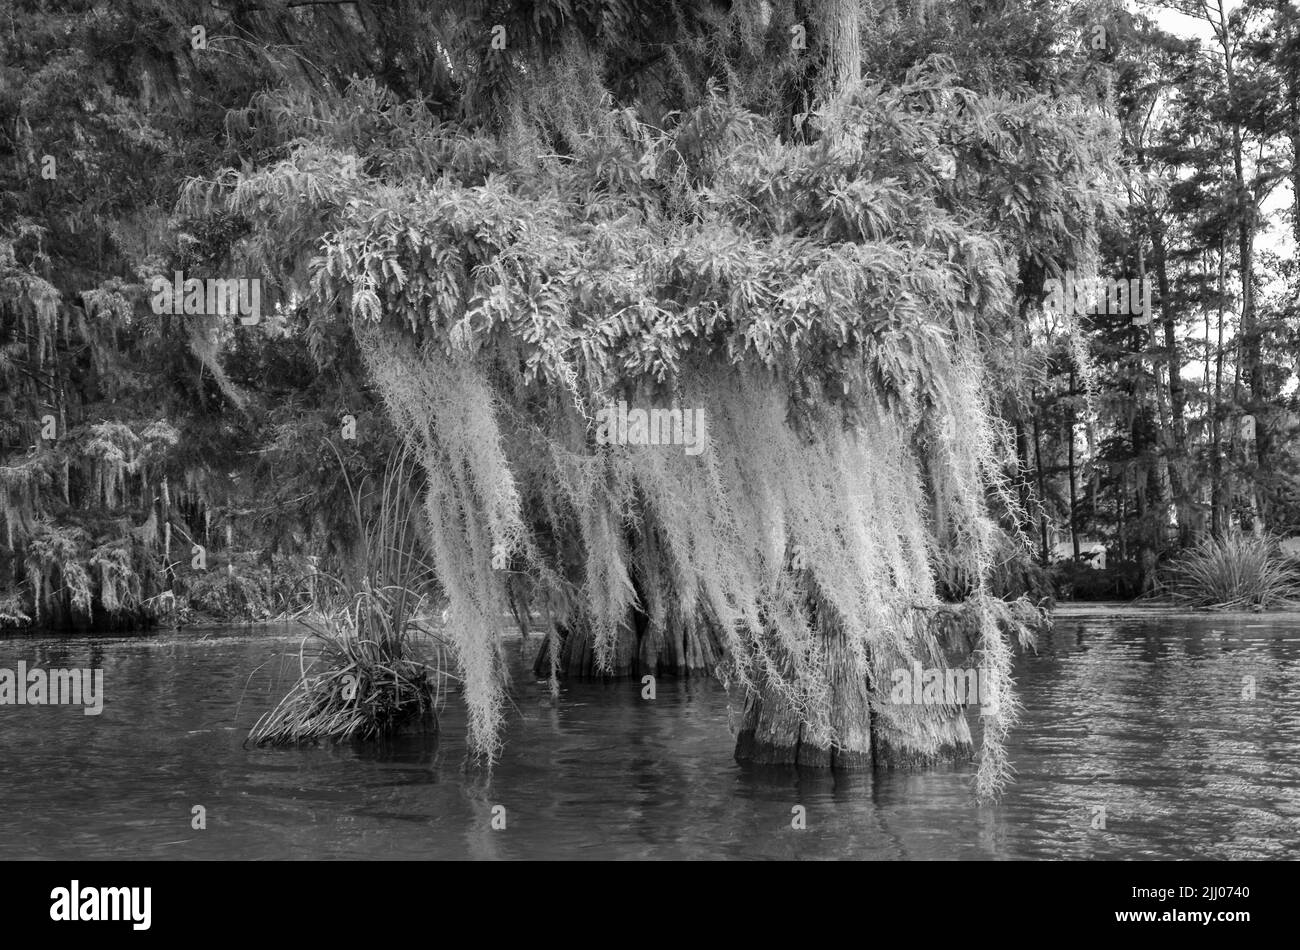 A b&w artsy photograph showing Spanish moss hanging from a Cyprus tree on Merritt's Mill Pond, Marianna, Florida, USA Stock Photo